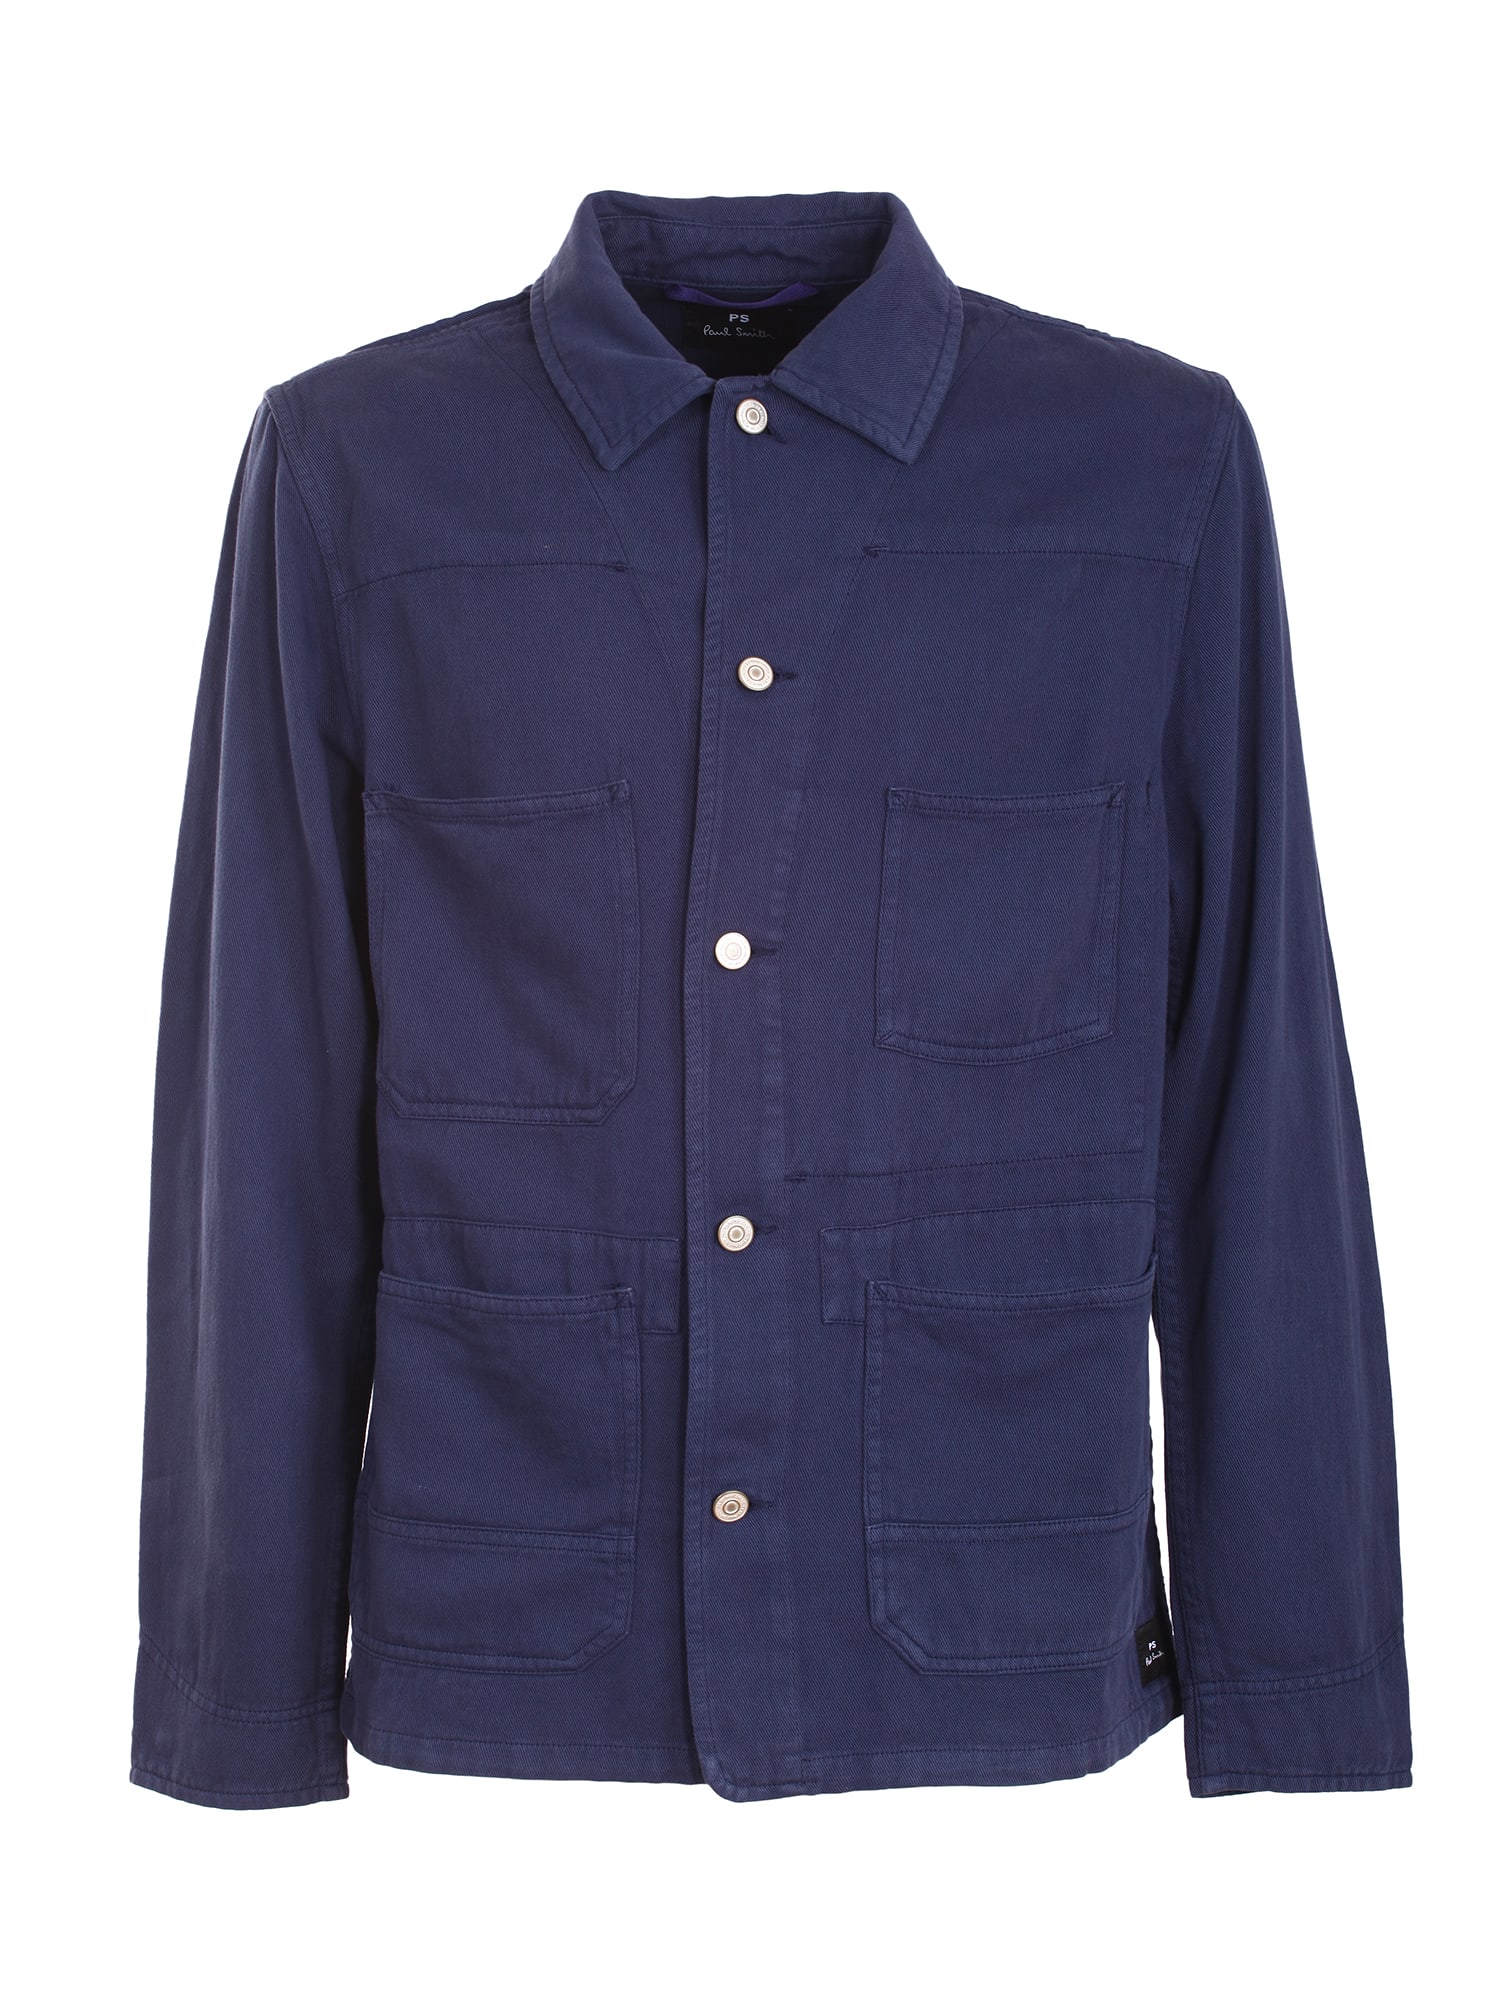 Paul Smith Linen and cotton jacket